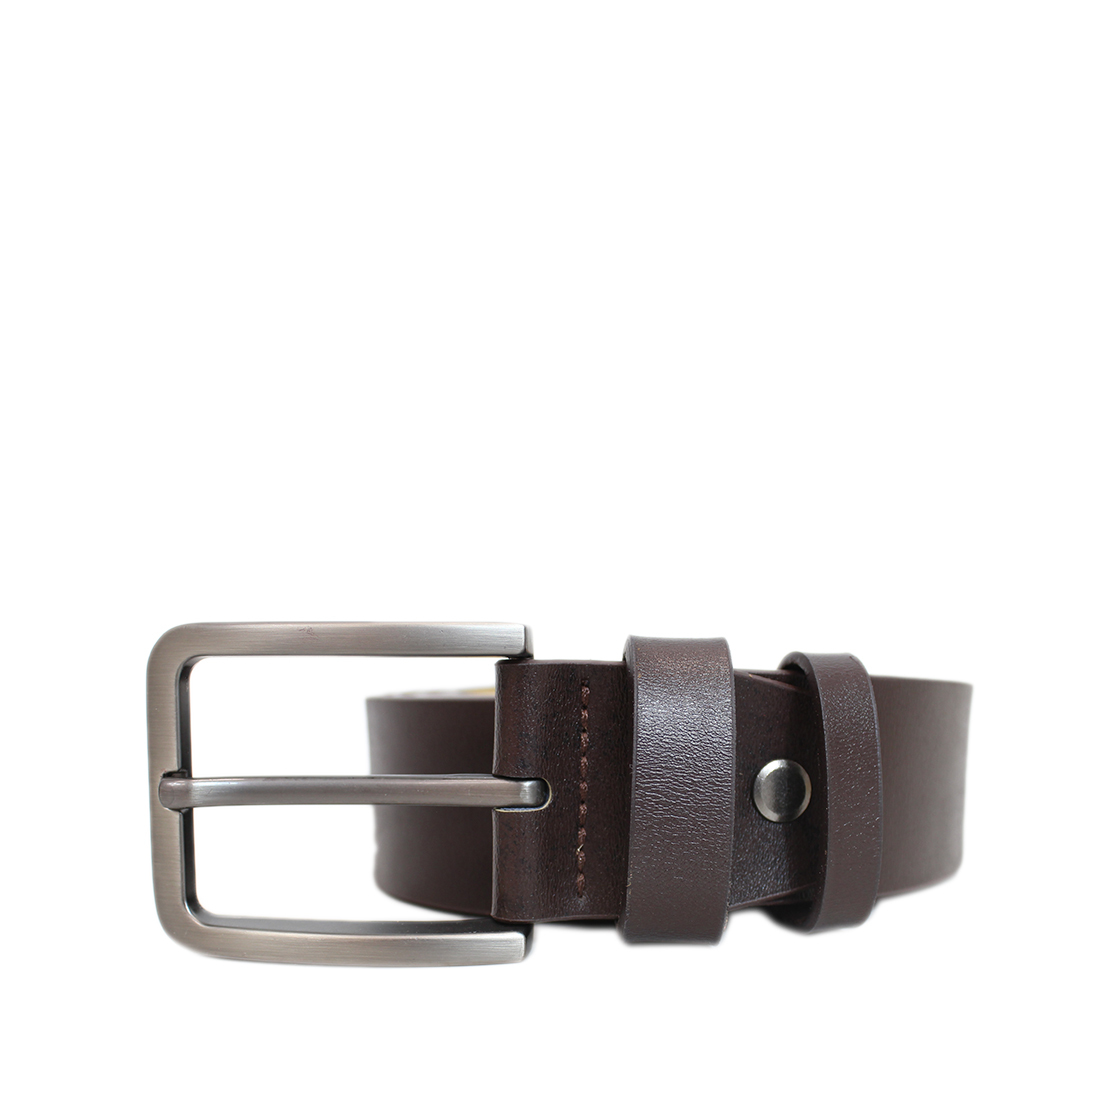 Plain with small rectangle buckle